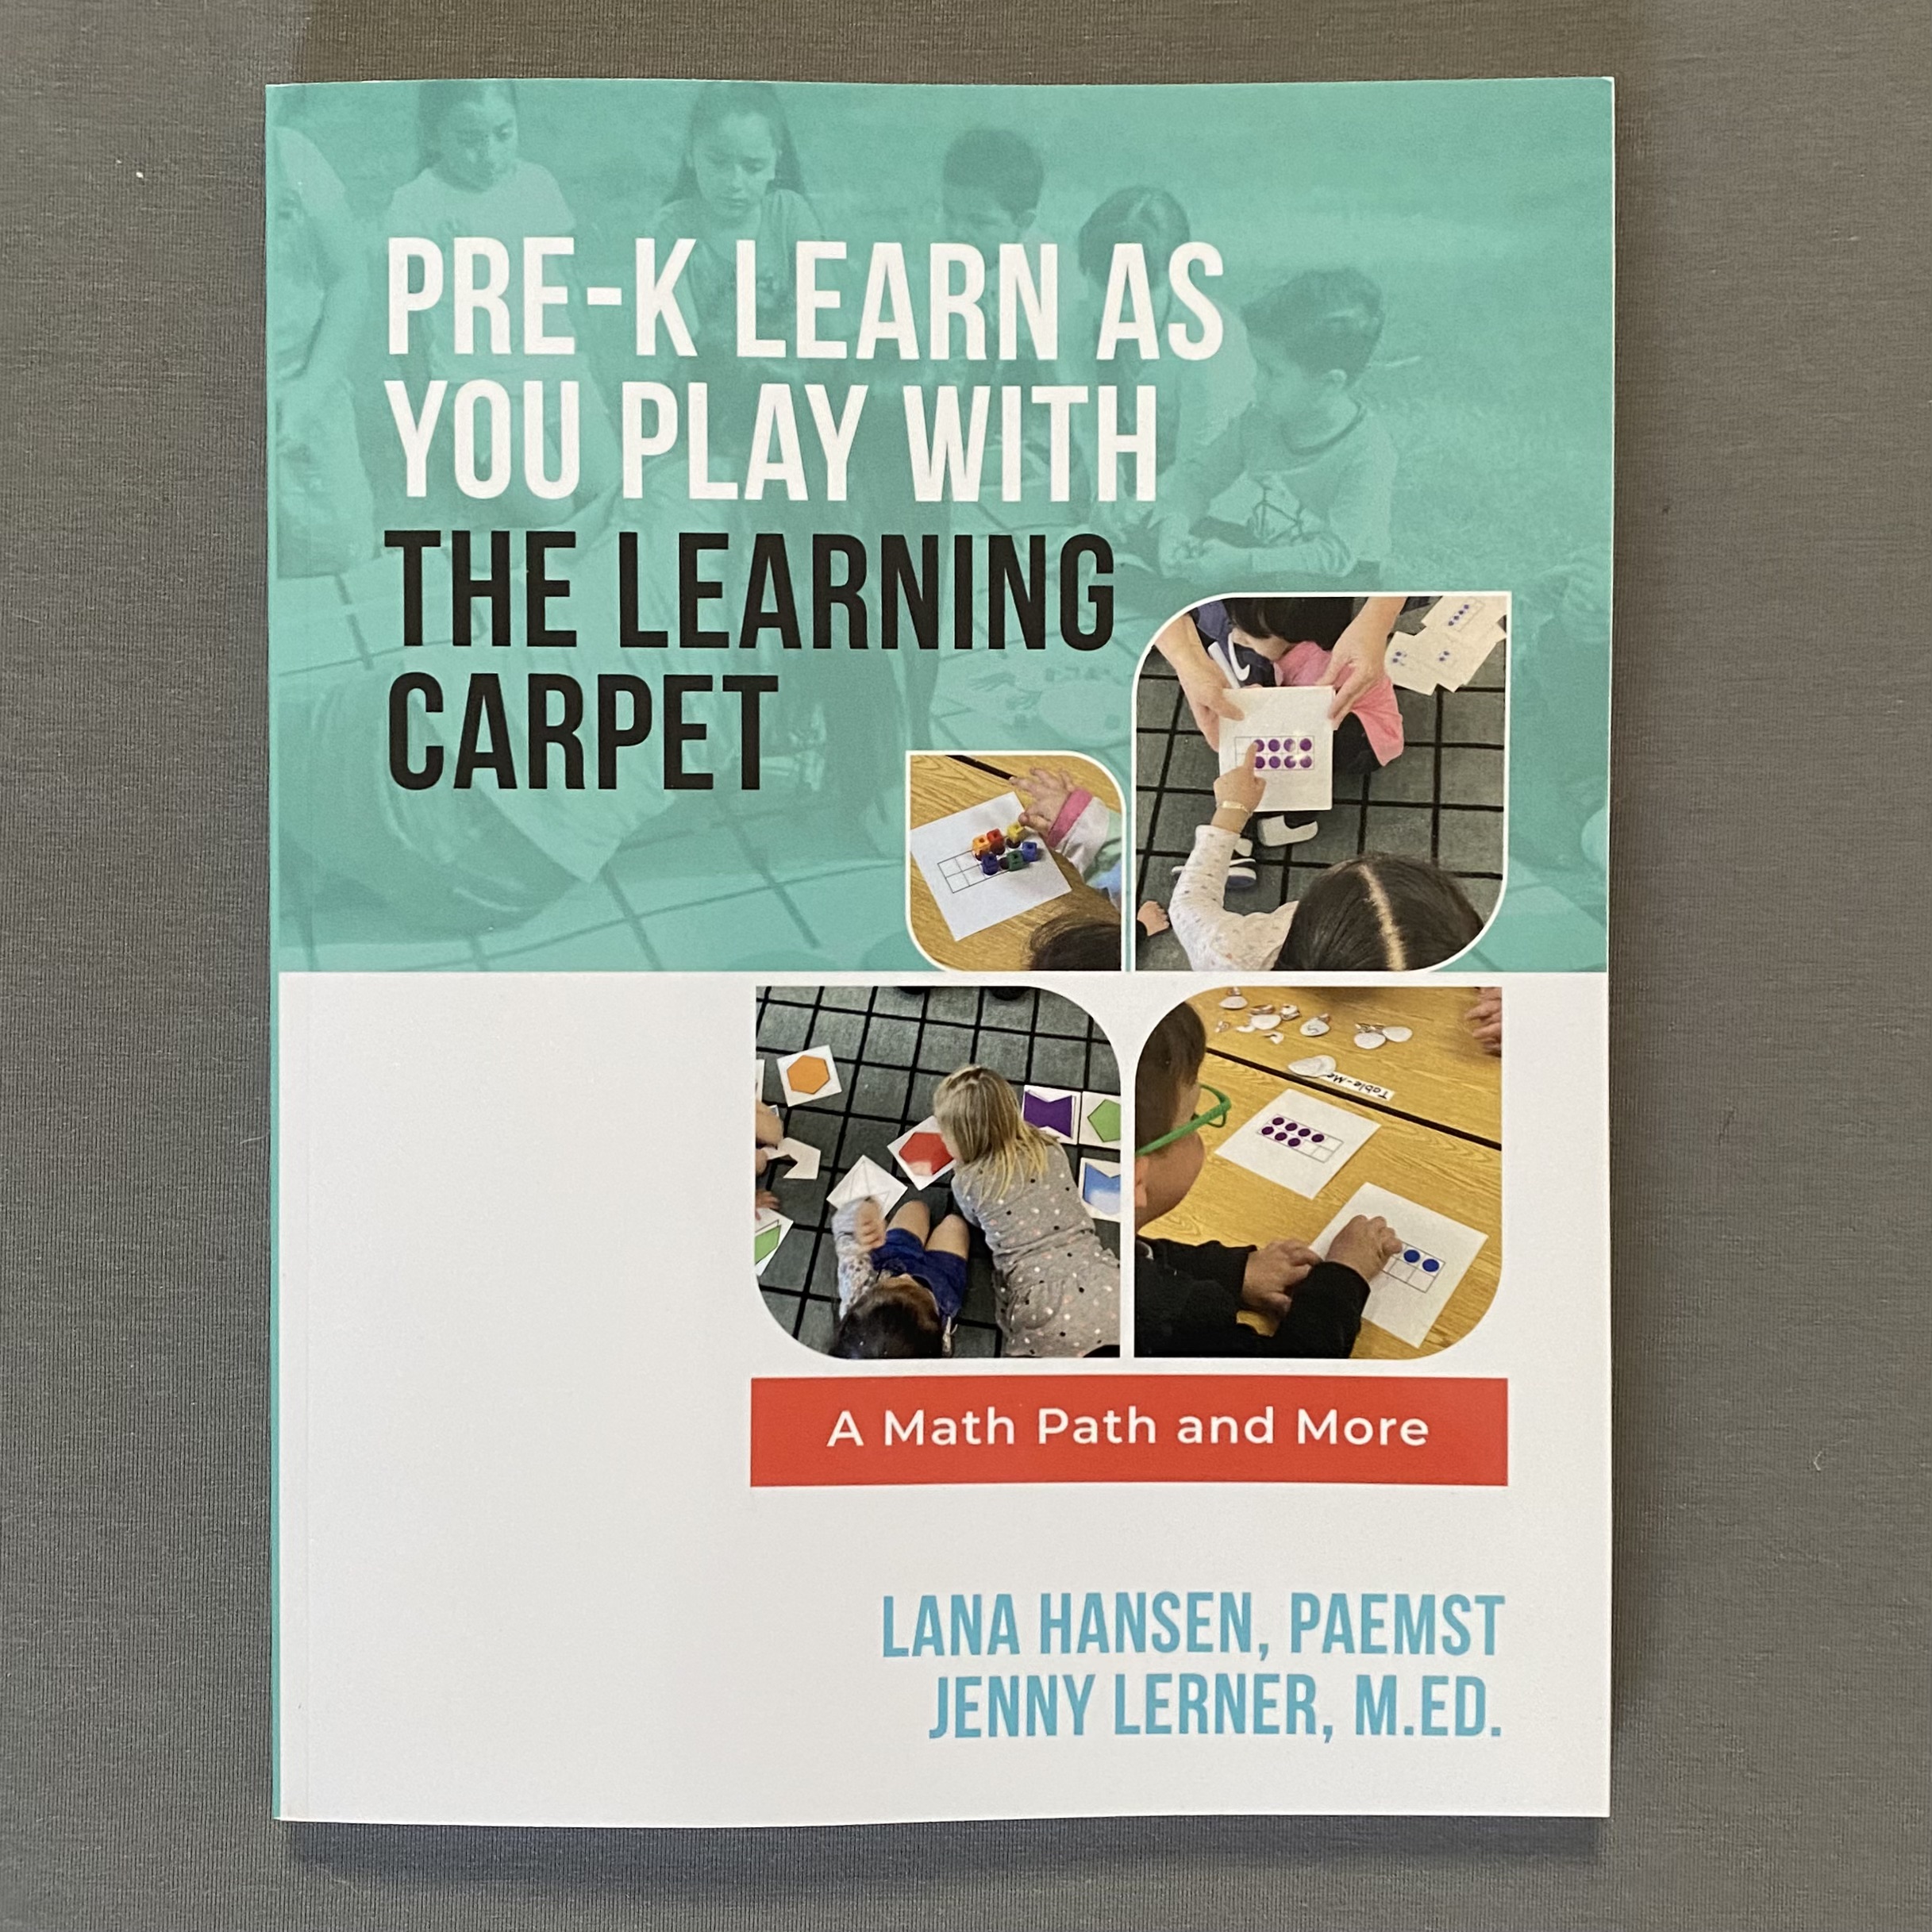 Featured image for “Pre-K Learn As You Play”